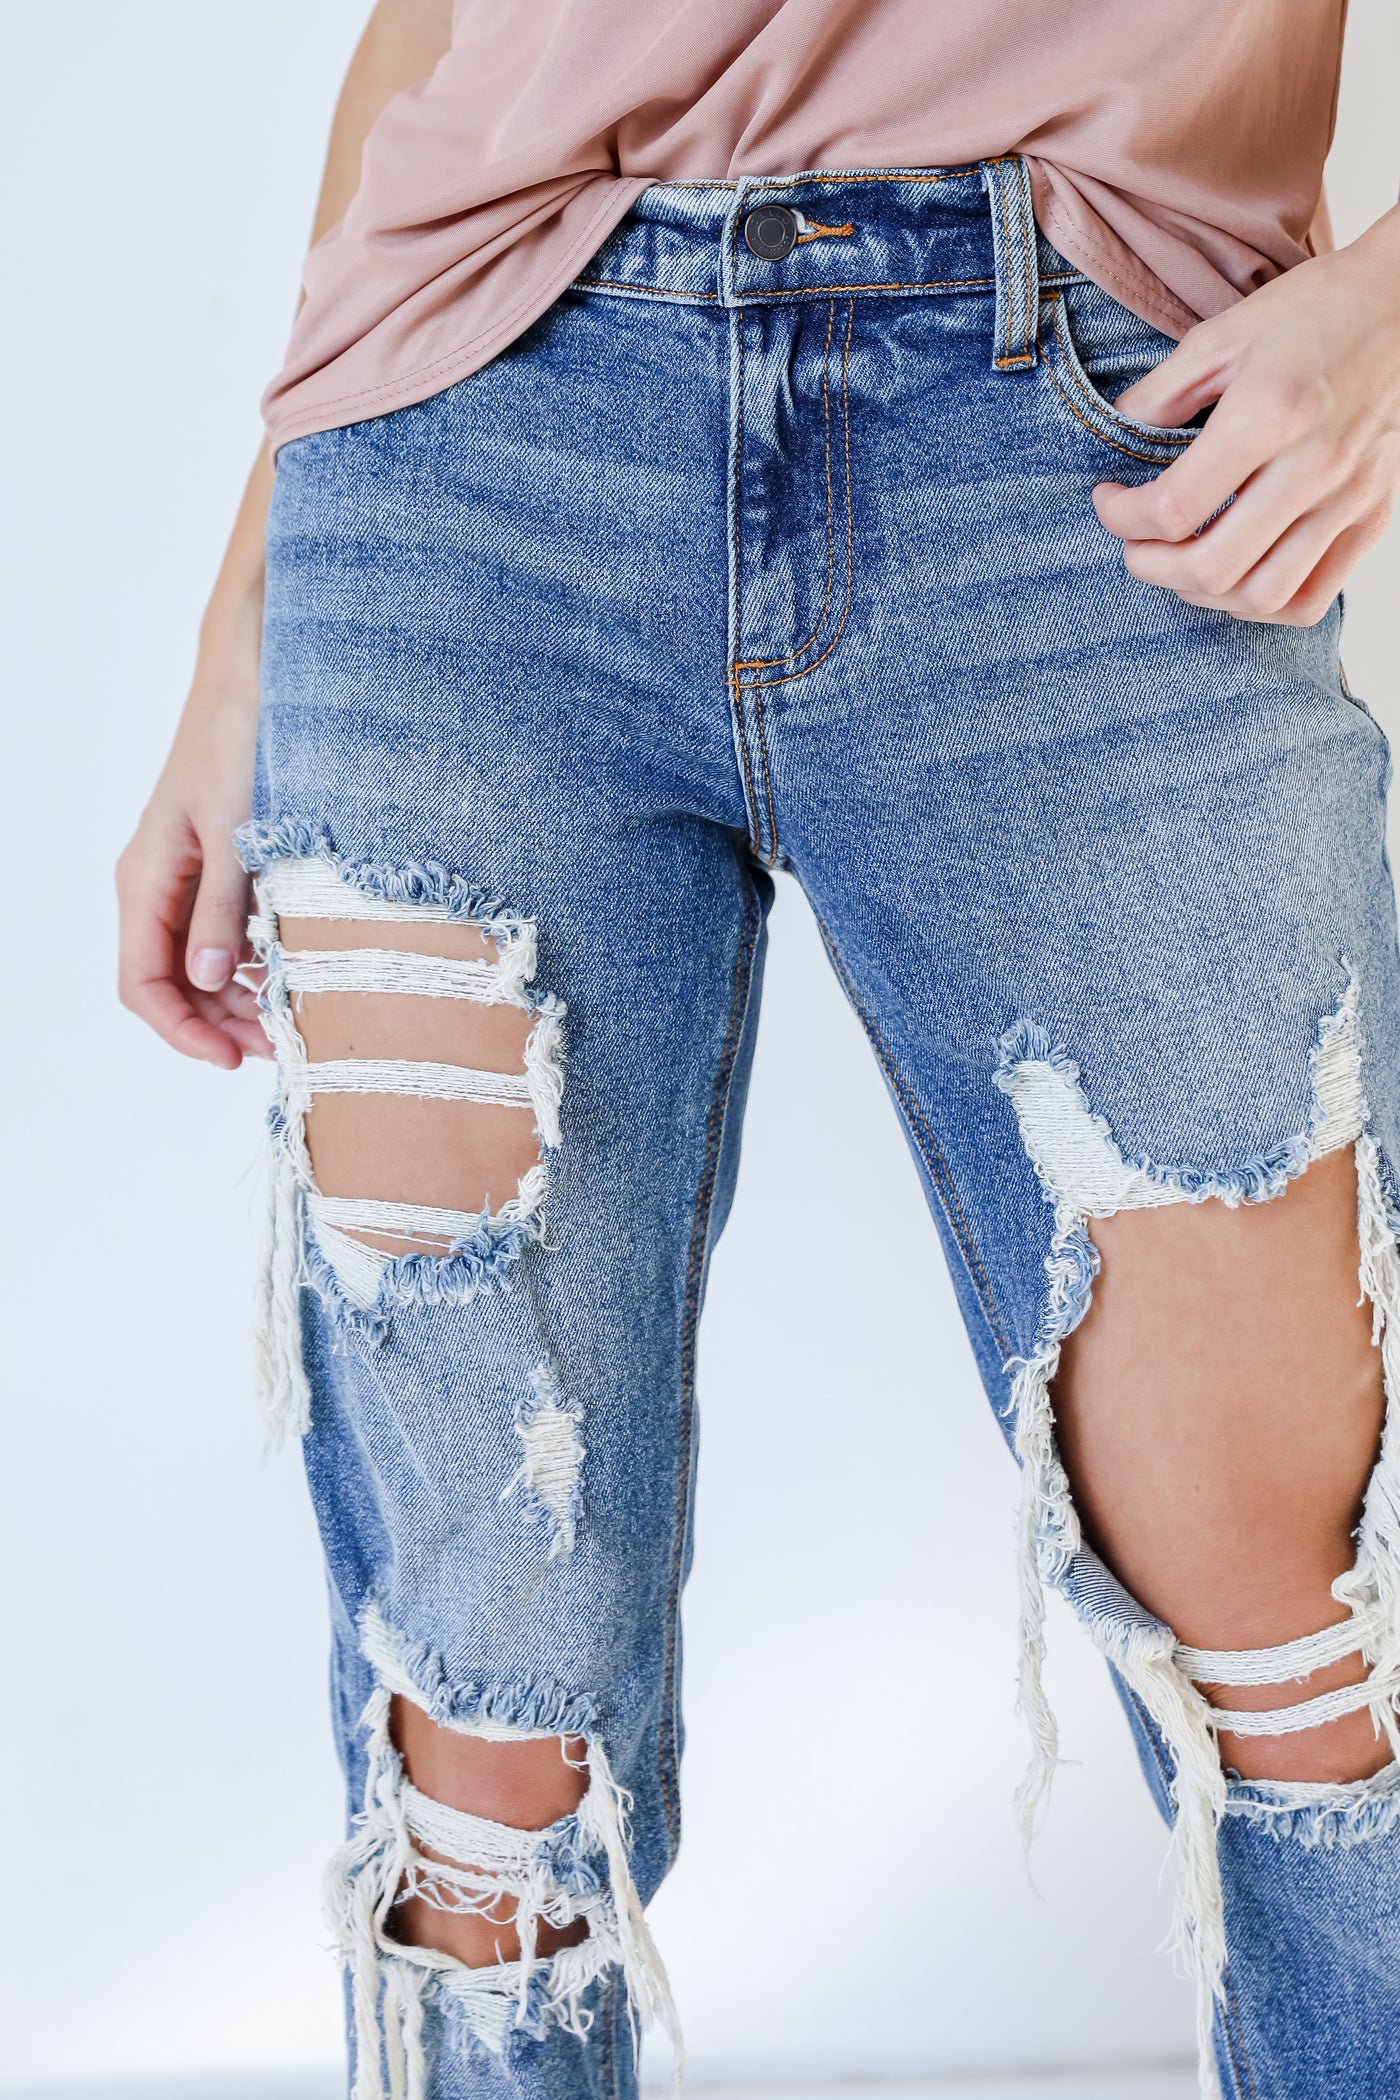 distressed denim jeans with booties